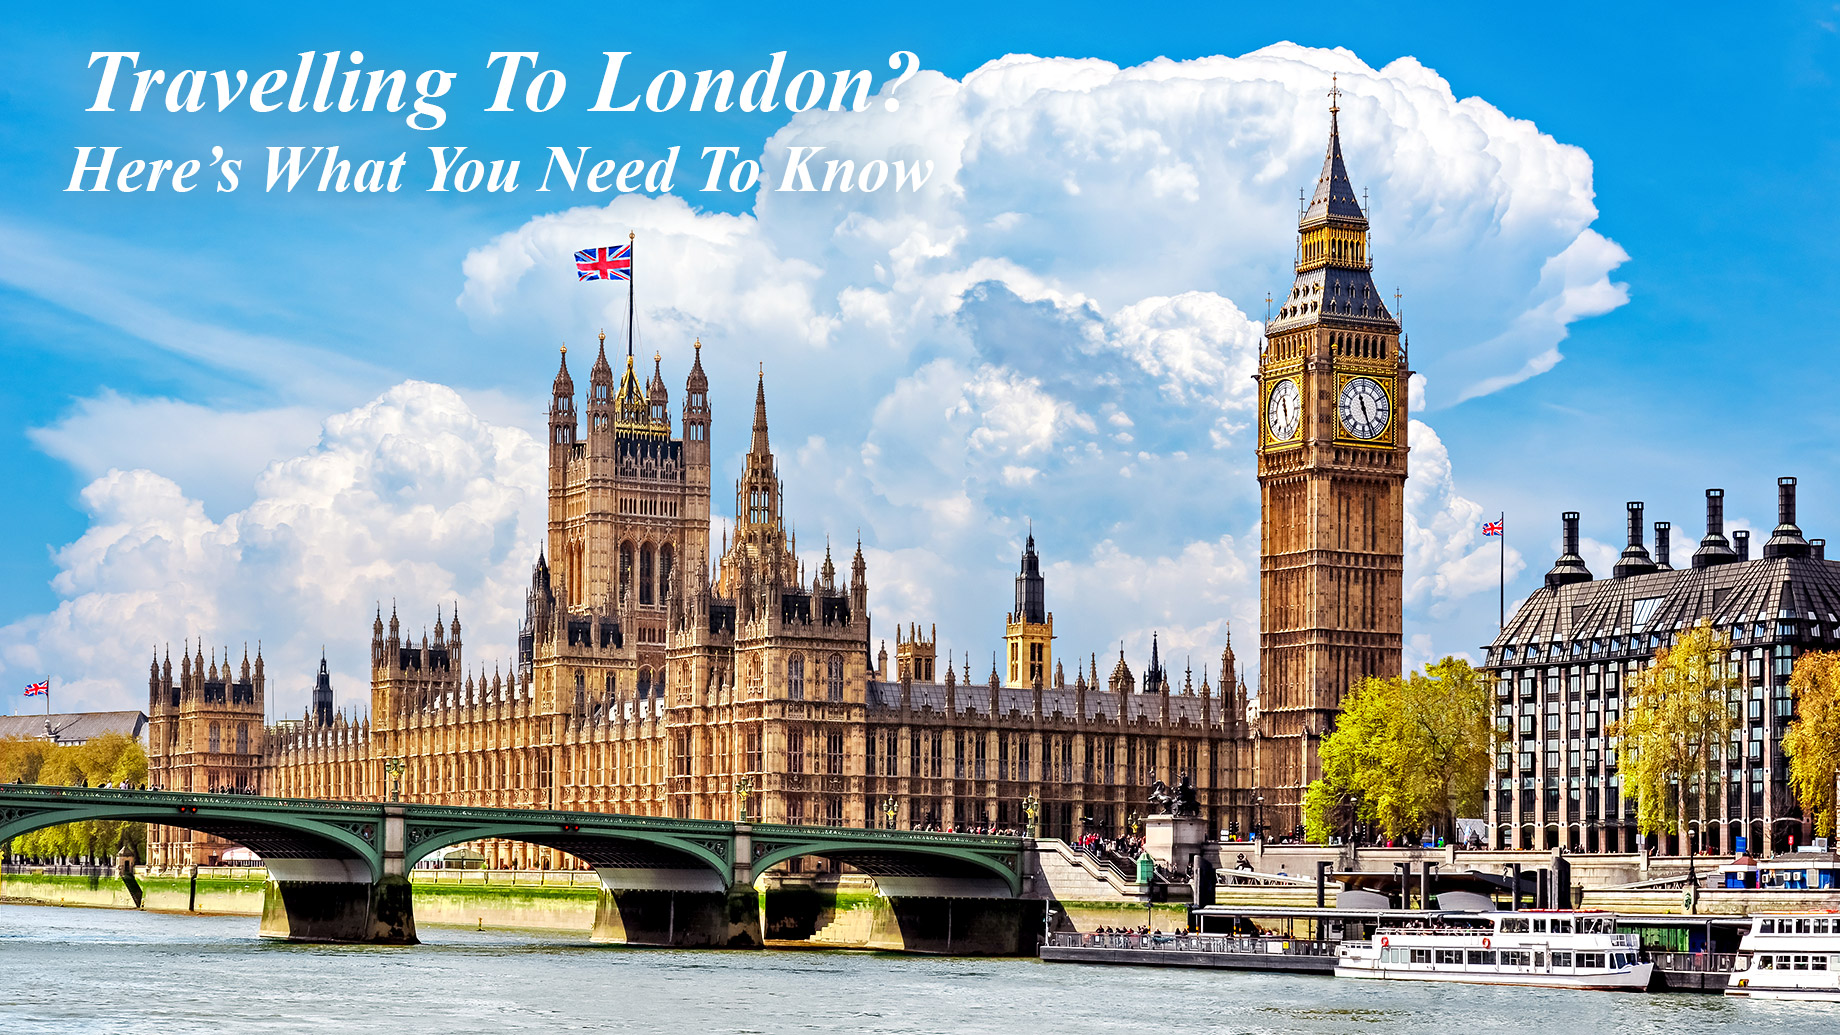 Travelling To London? Here’s What You Need To Know